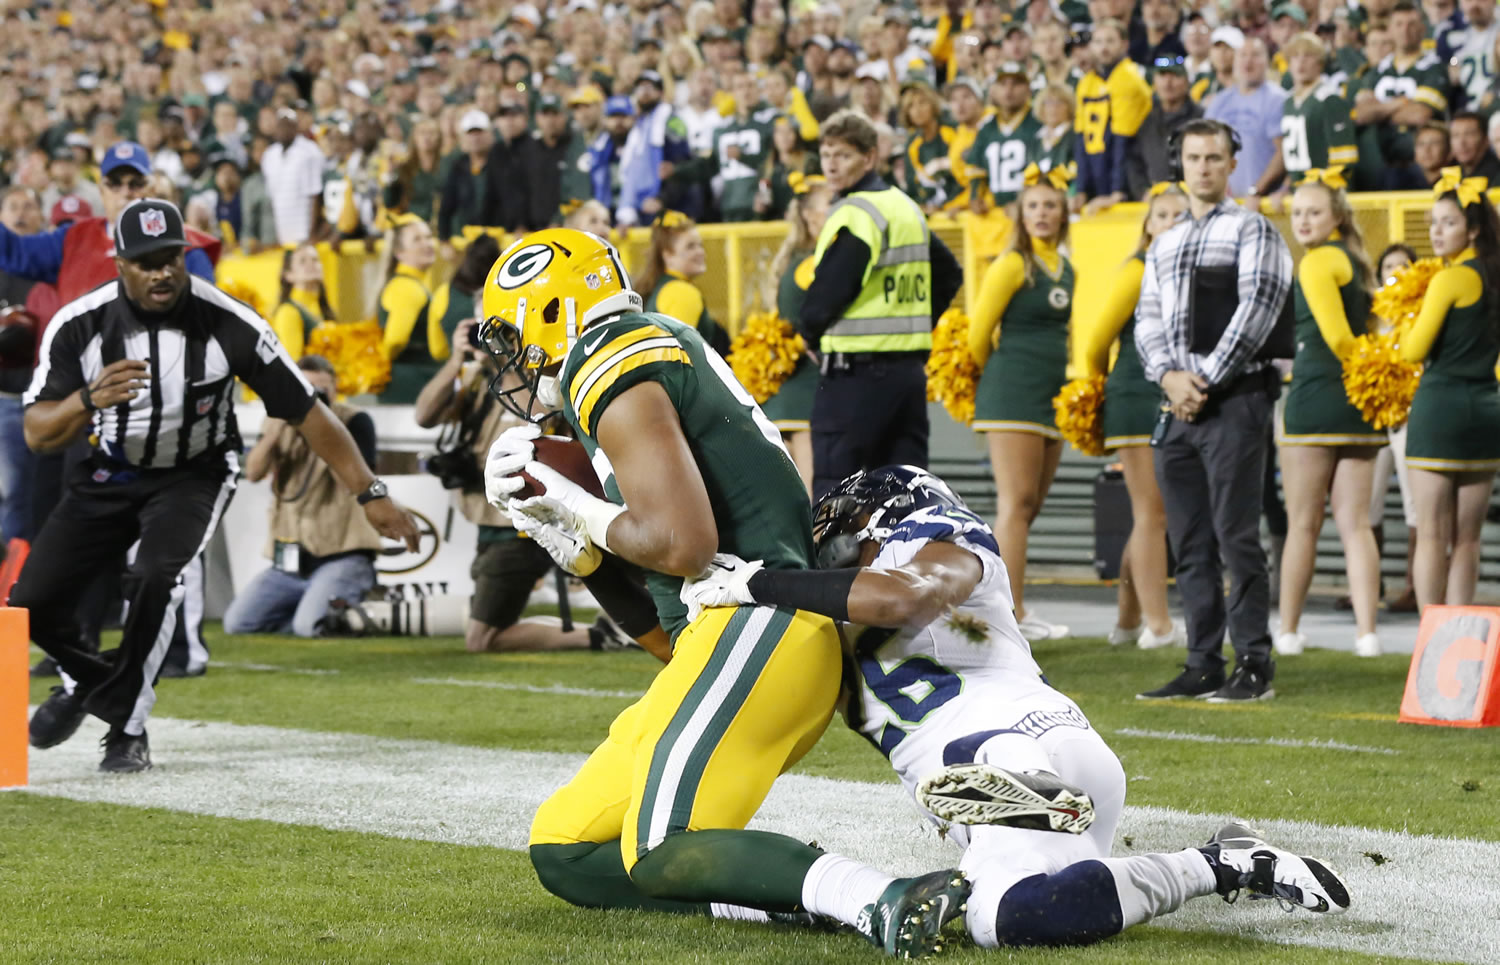 Green Bay Packers' Richard Rodgers catches a touchdown pass in front of Seattle Seahawks' Cary Williams during the second half of an NFL football game Sunday, Sept. 20, 2015, in Green Bay, Wis.